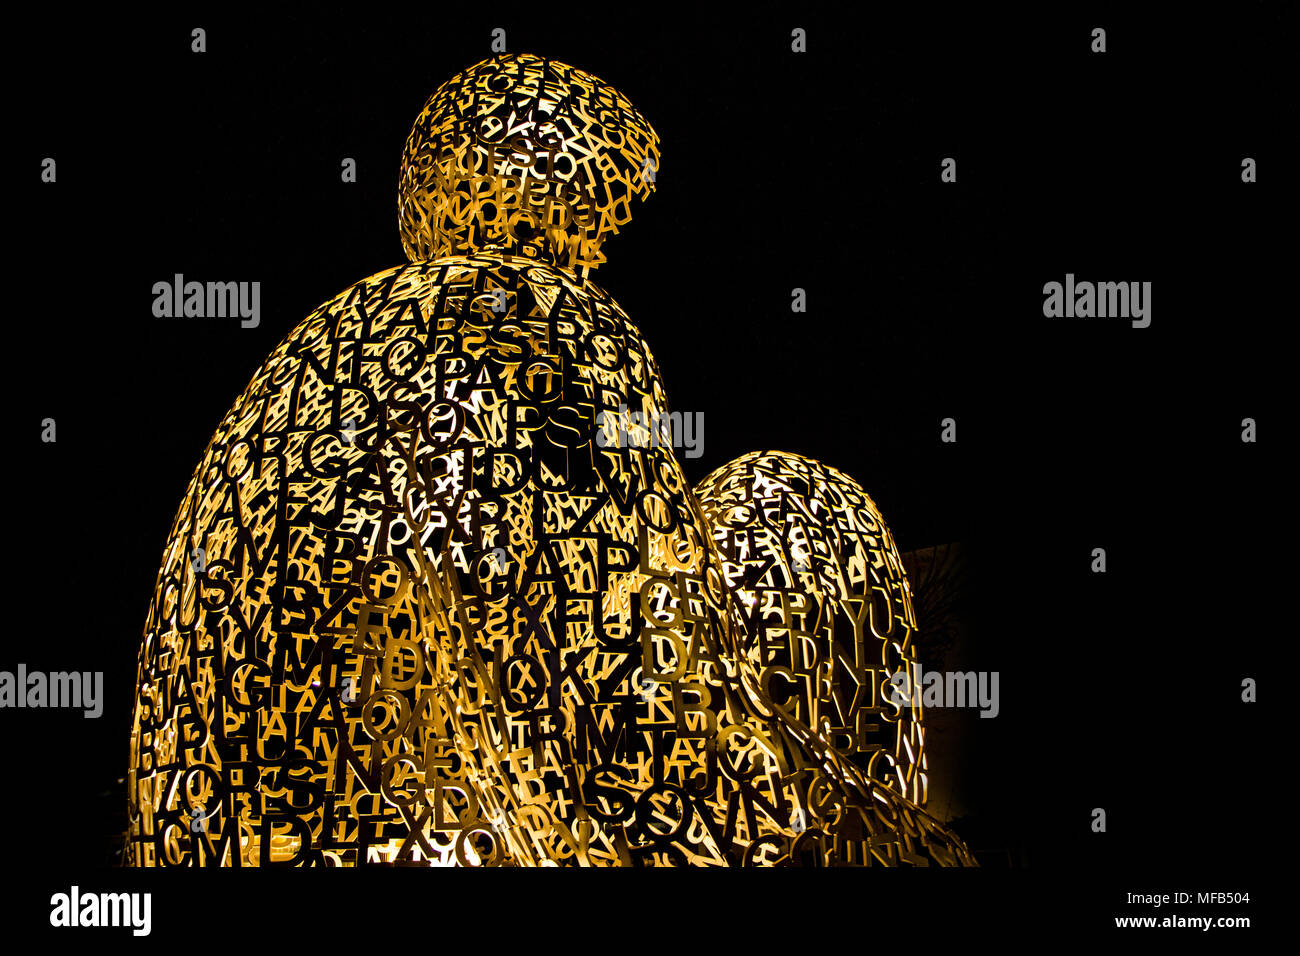 A detail Picture of the sculpture in the swedish town Boras. Made of letters in the shape of sitting man. Stock Photo